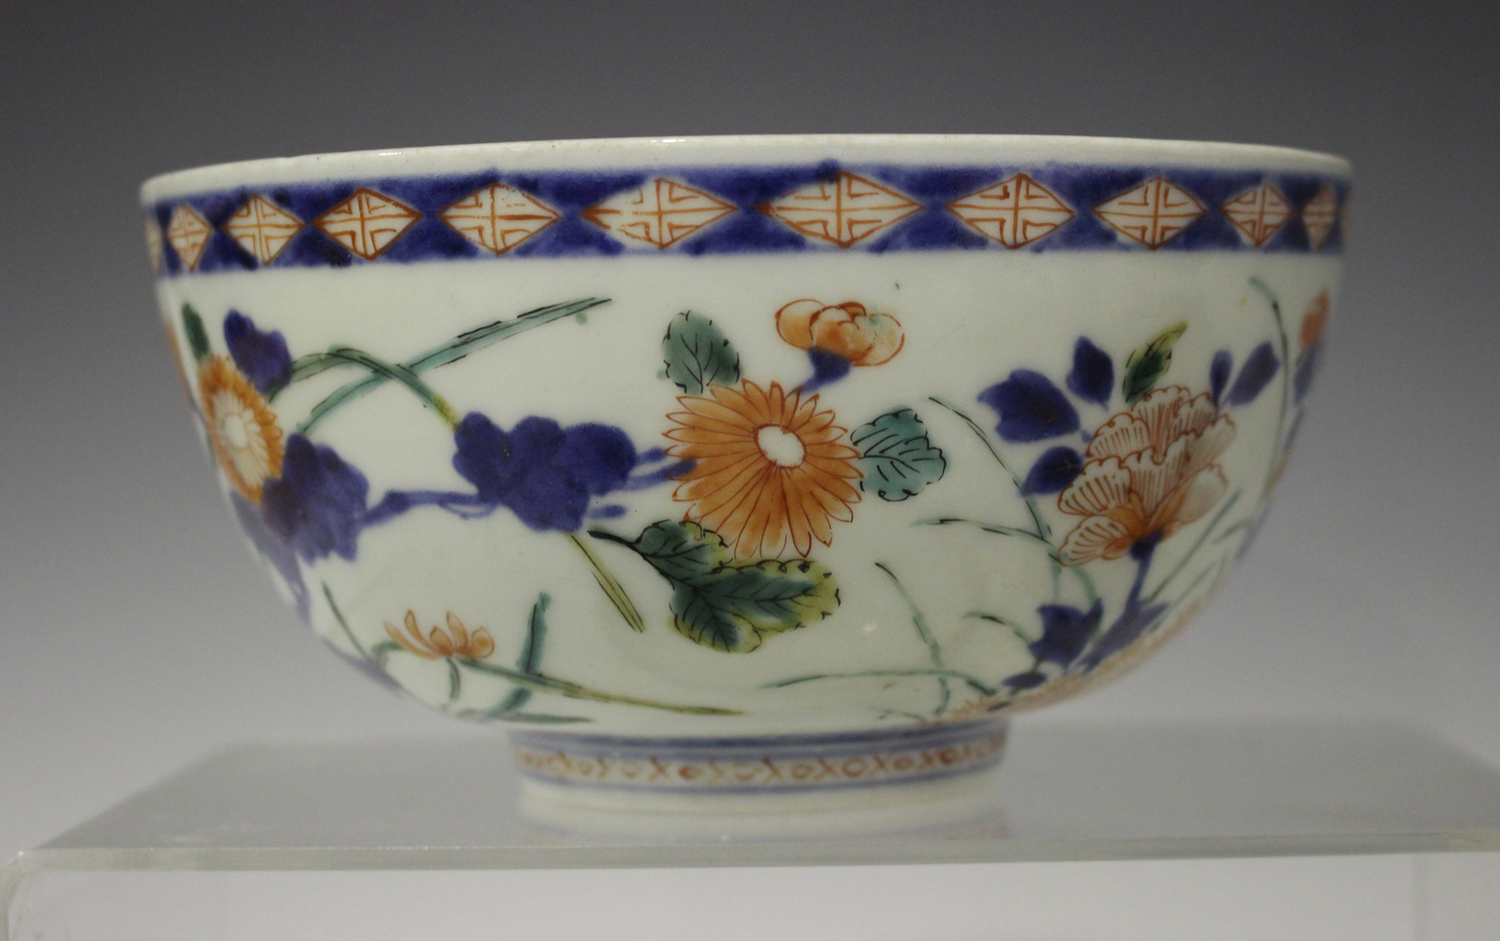 A Japanese Imari porcelain bowl, early 18th century, painted with peonies, chrysanthemums and lotus, - Image 5 of 6